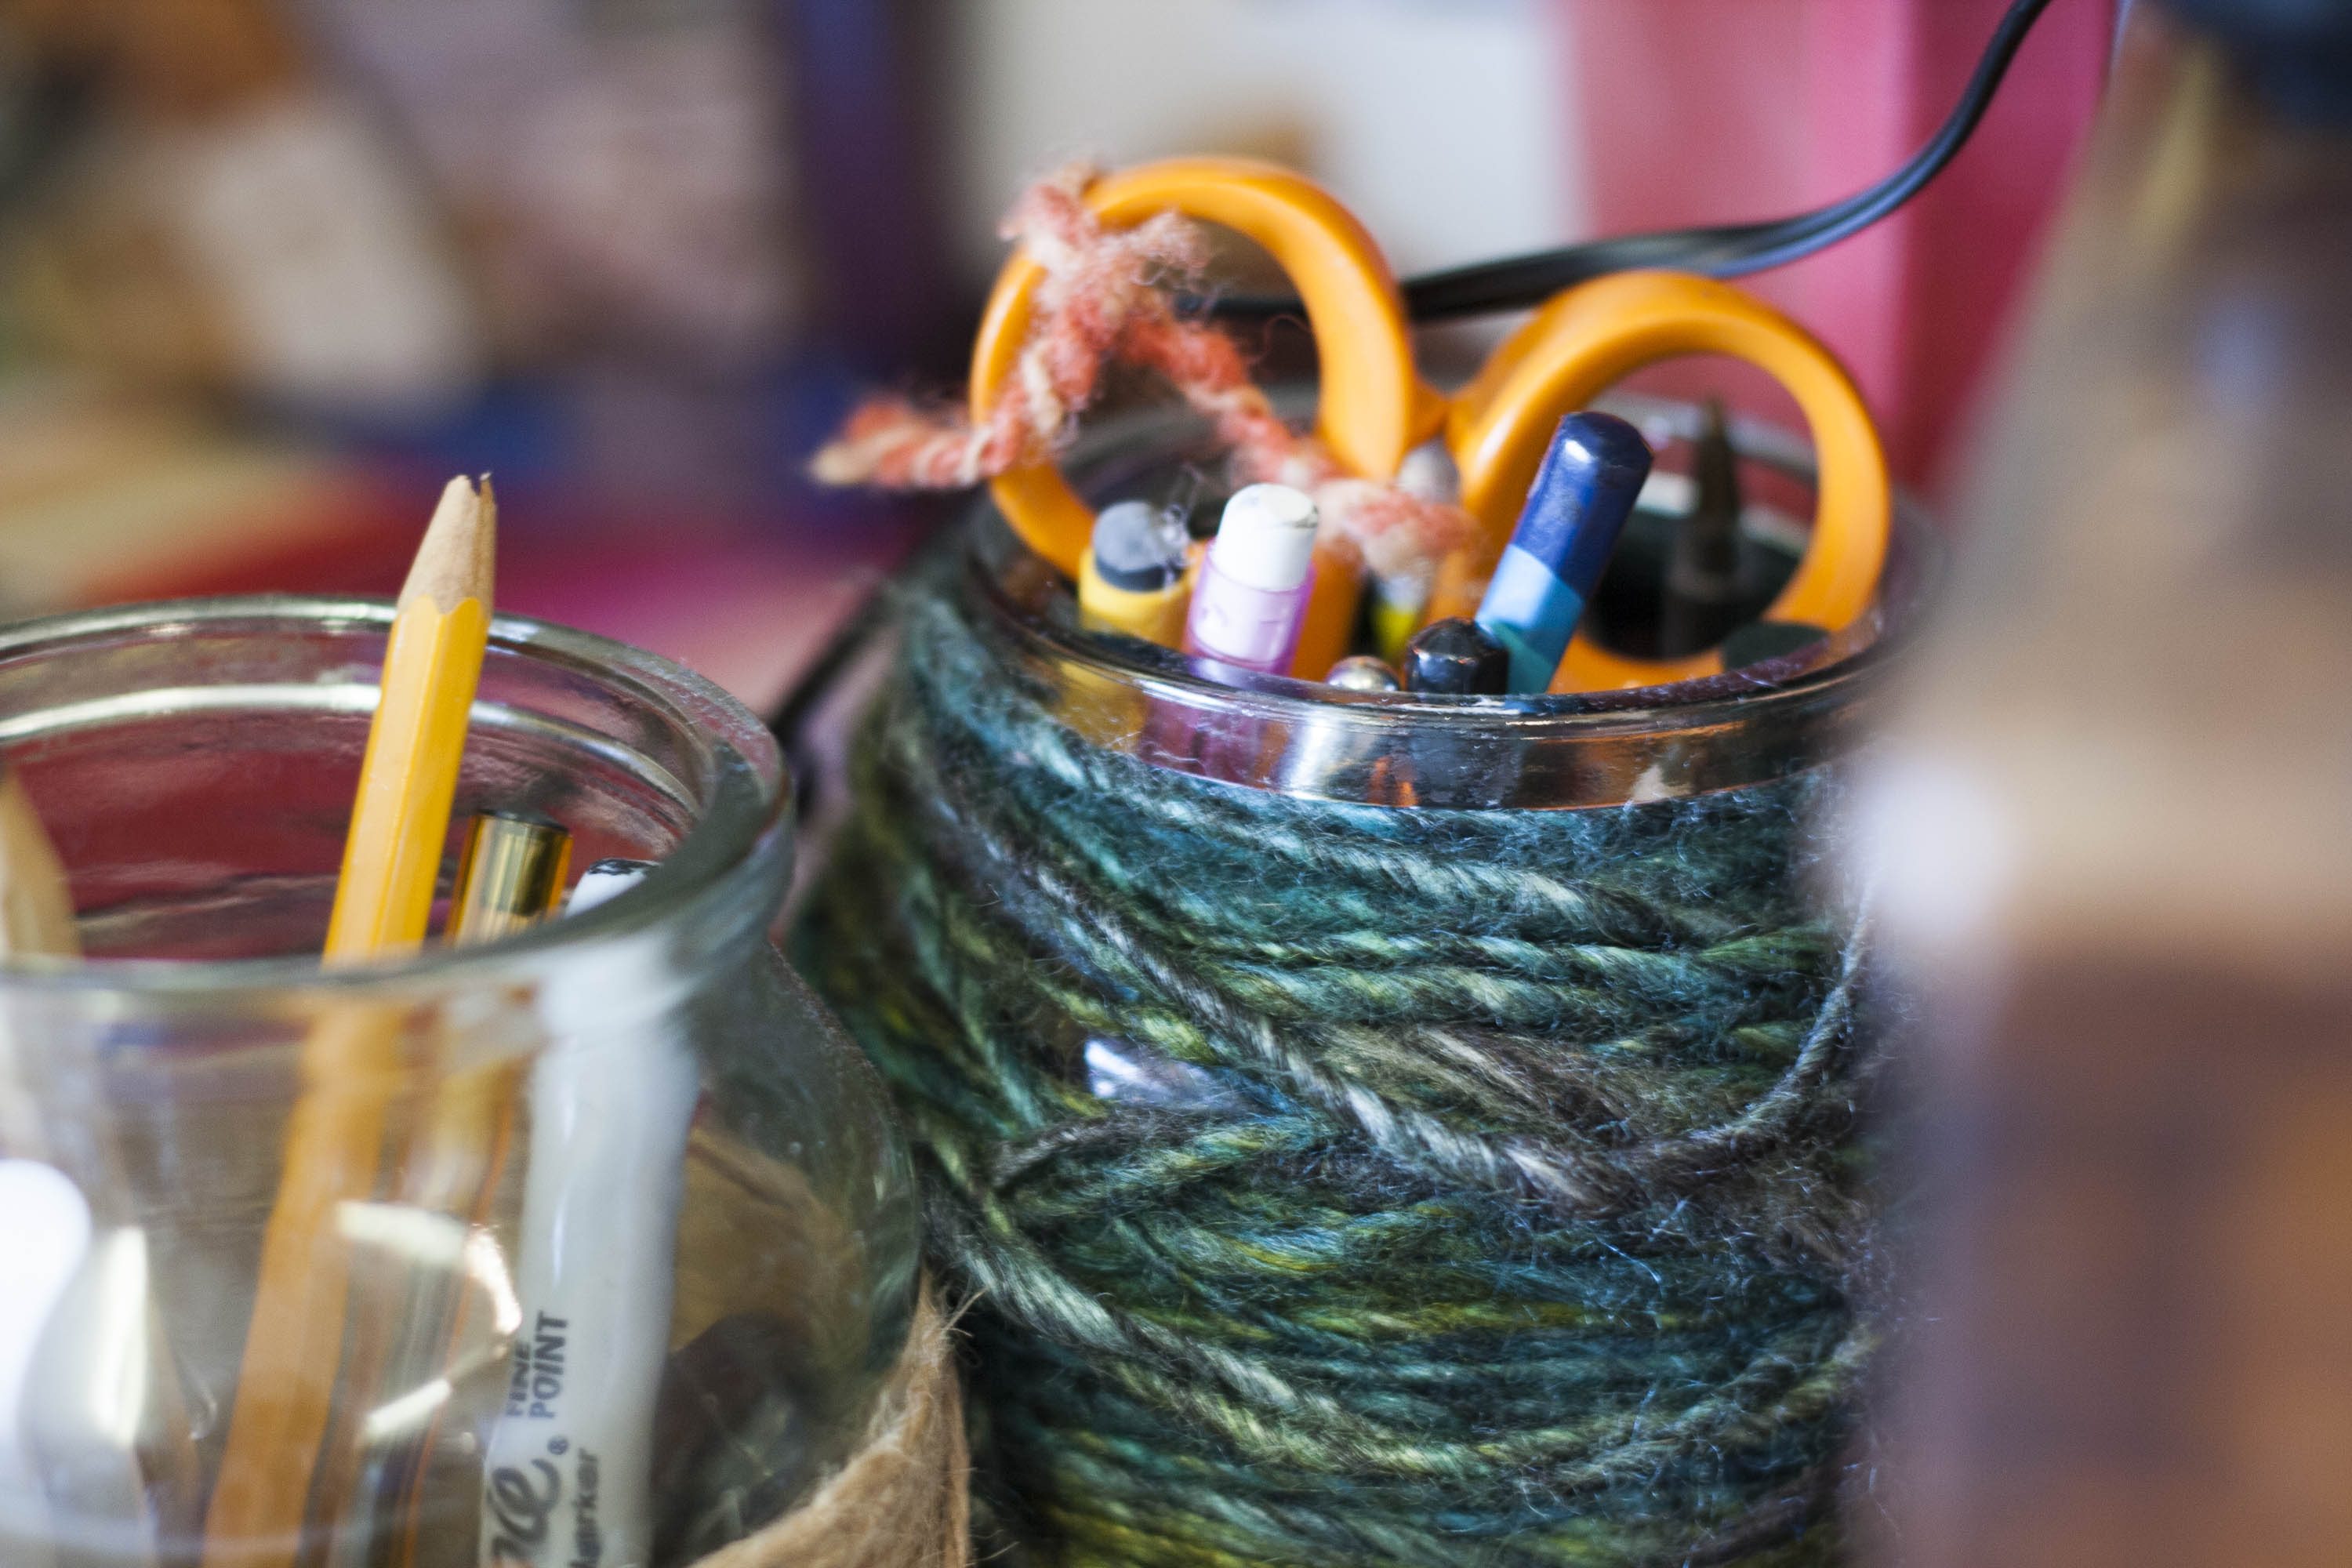 Two jam jars in the Nielanell studio, Hoswick, Shetland, with pencils, pens, scissors etc. One with teal and green handspun yarn wrapped around it